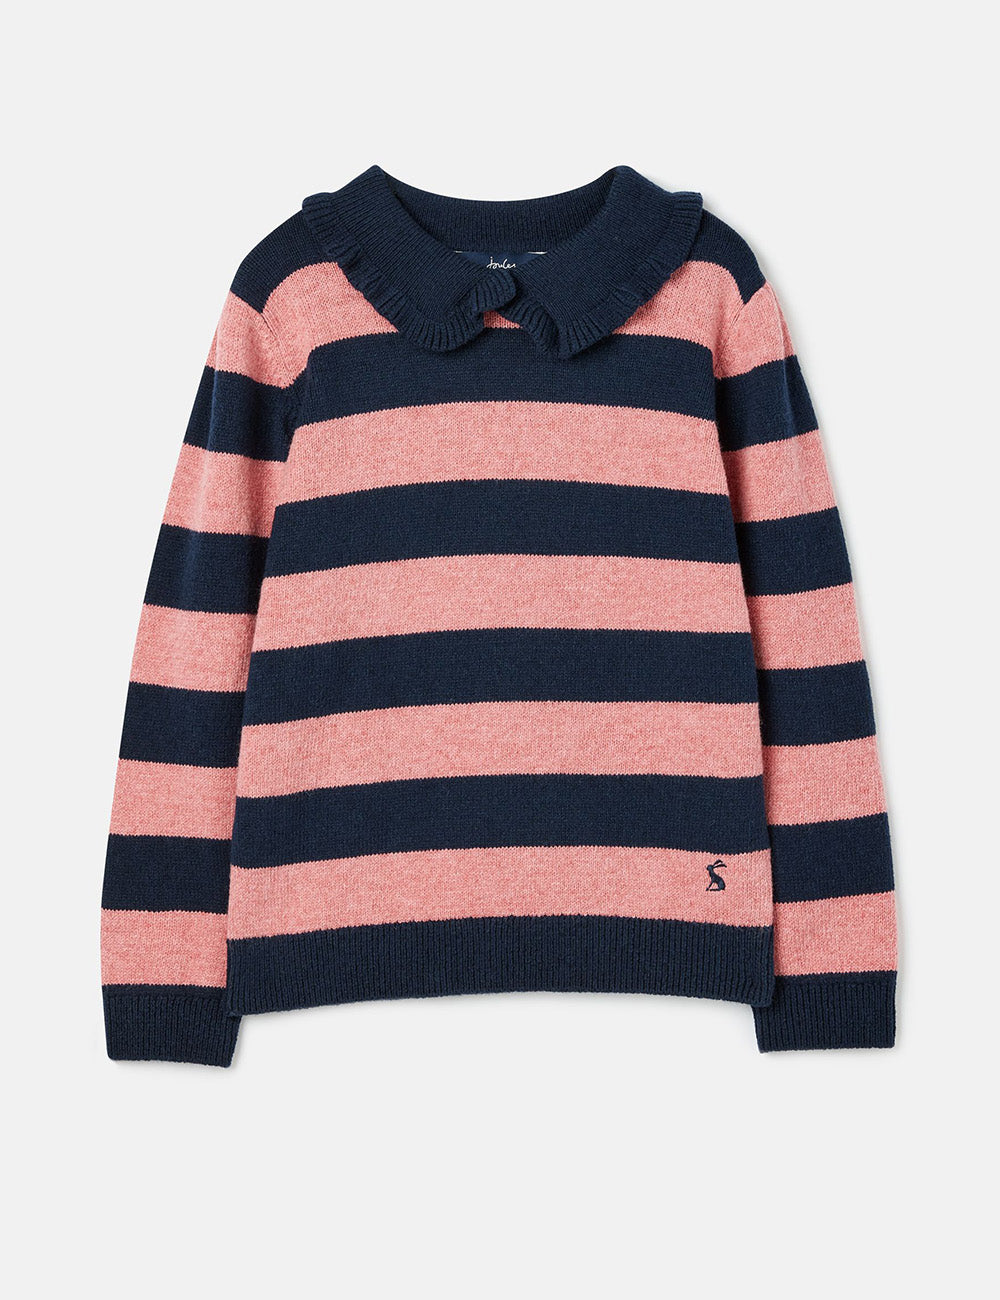 Joules Maddie Knitted Jumper - Navy Stripe